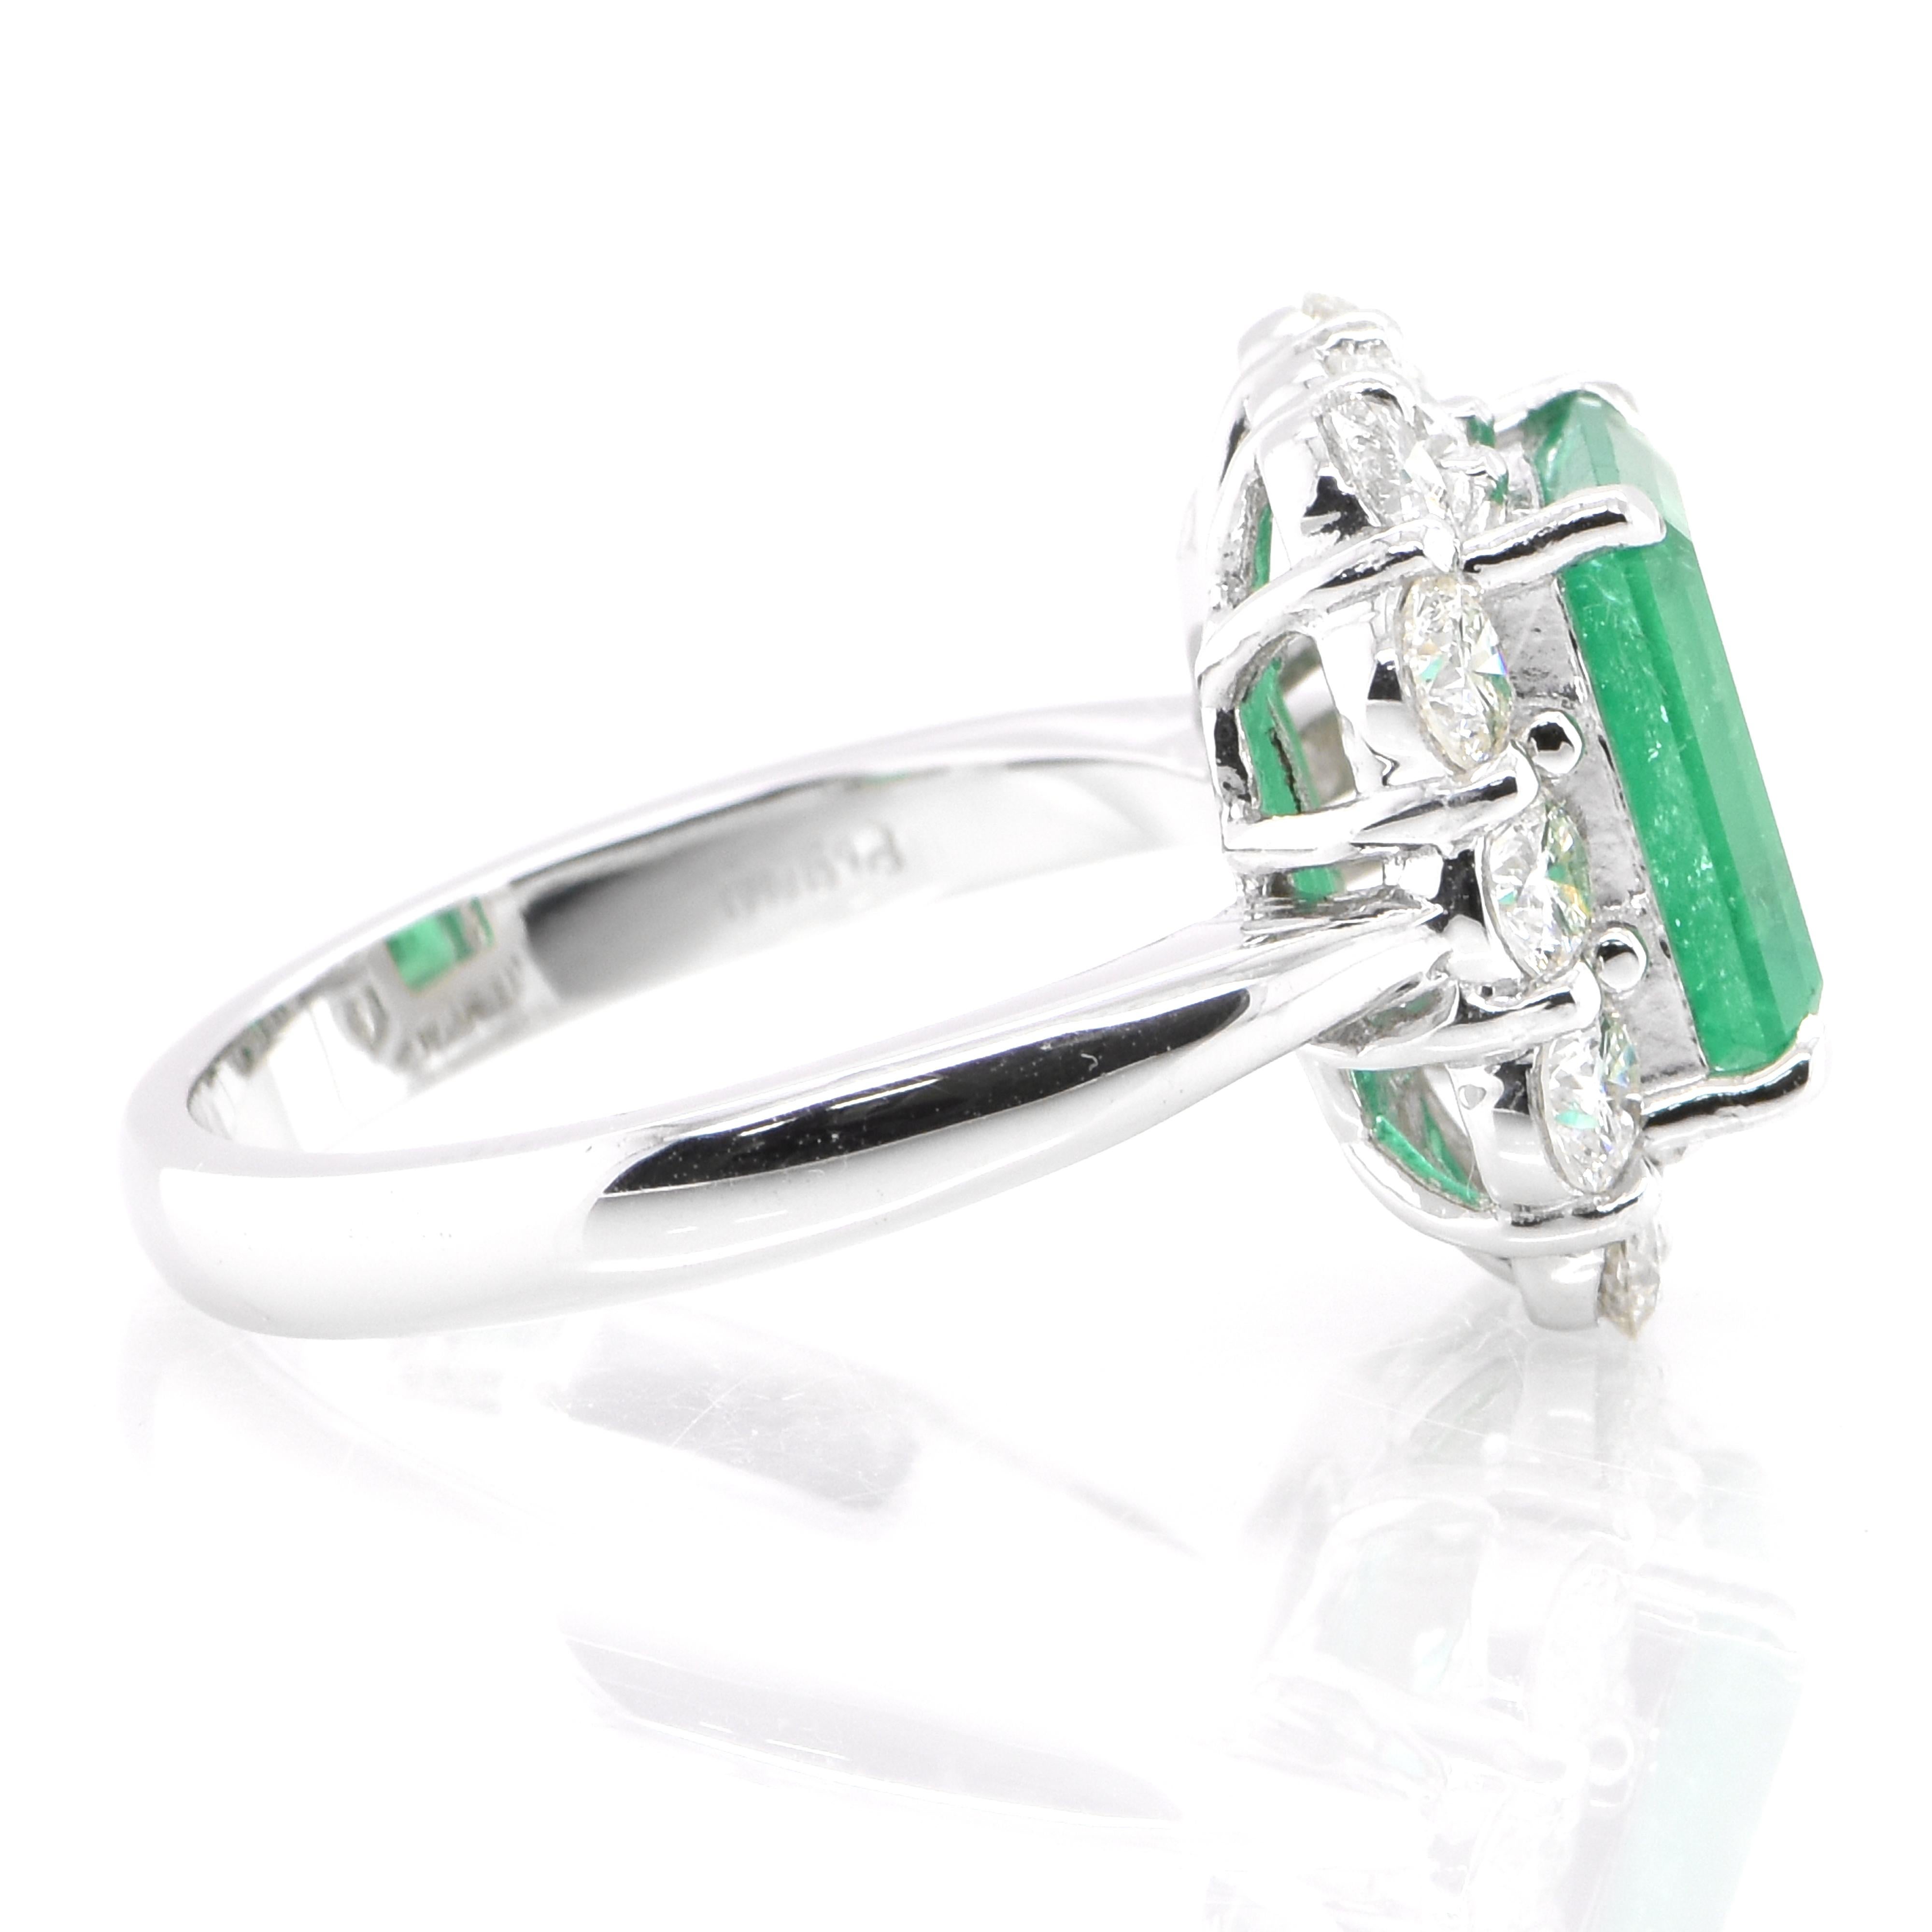 Women's 2.36 Carat Natural Colombian Emerald and Diamond Ring Set in Platinum